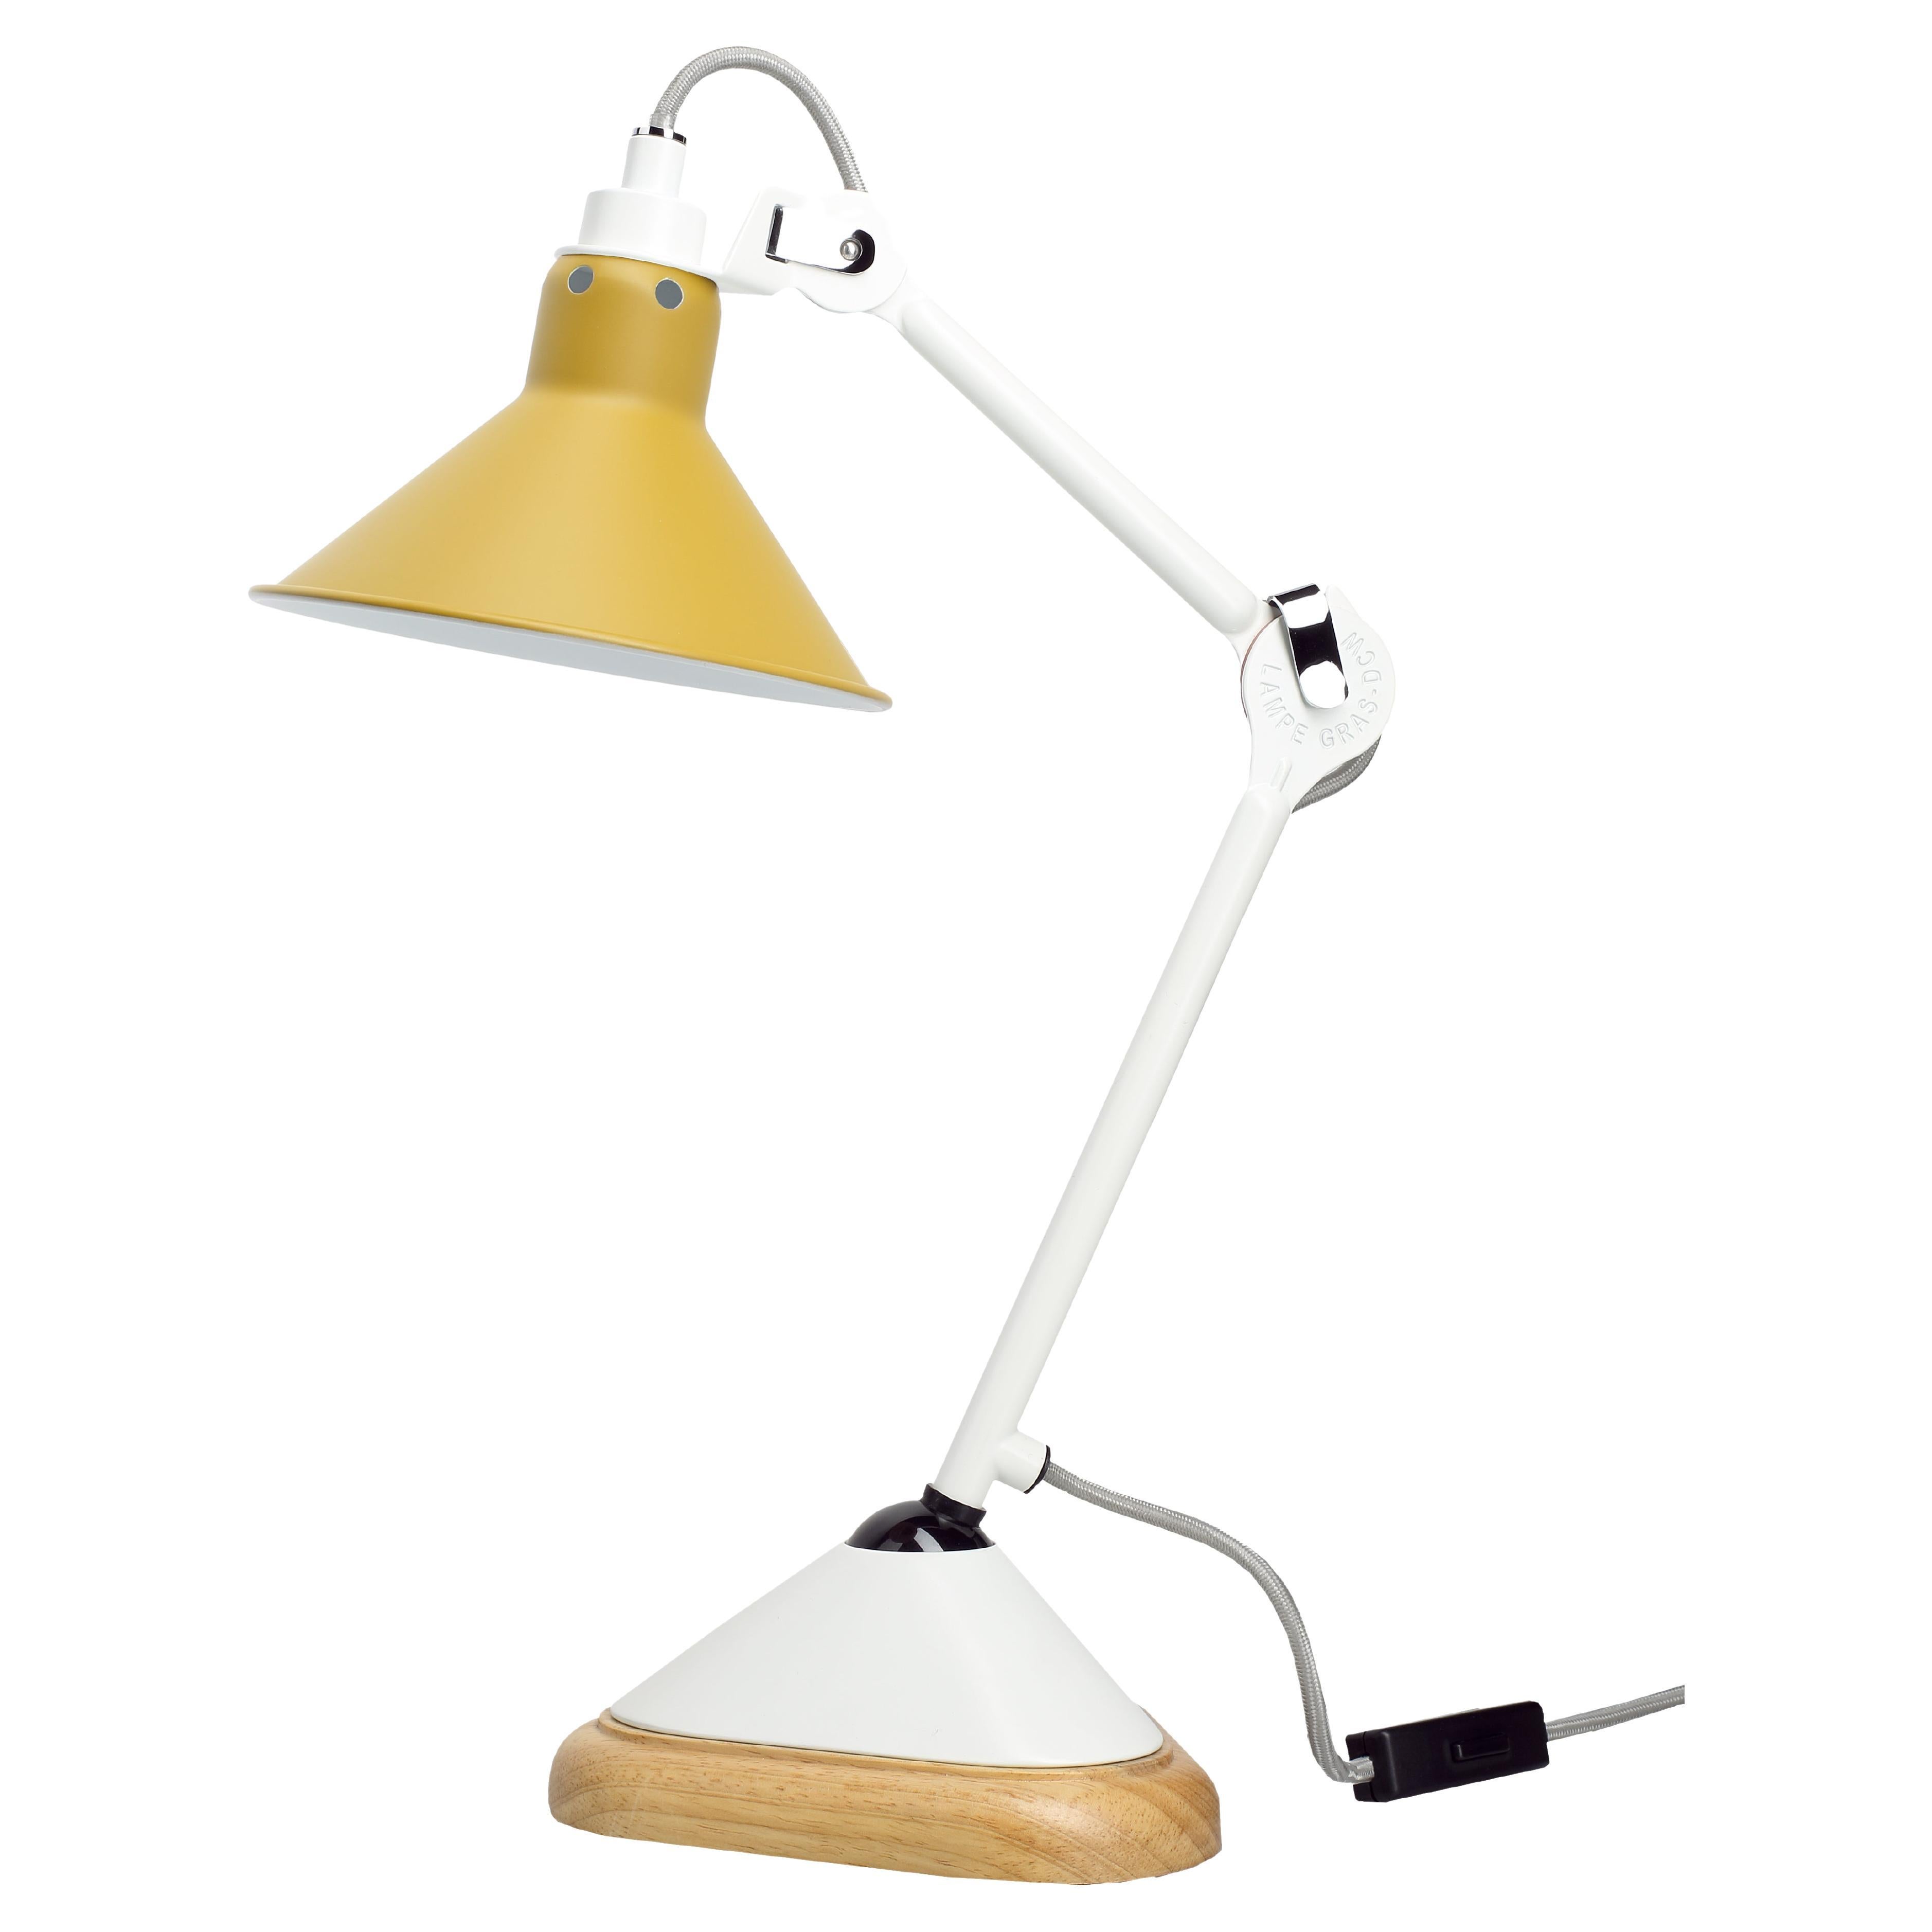 DCW Editions La Lampe Gras N°207 Conic Table Lamp in White Arm with Yellow Shade For Sale